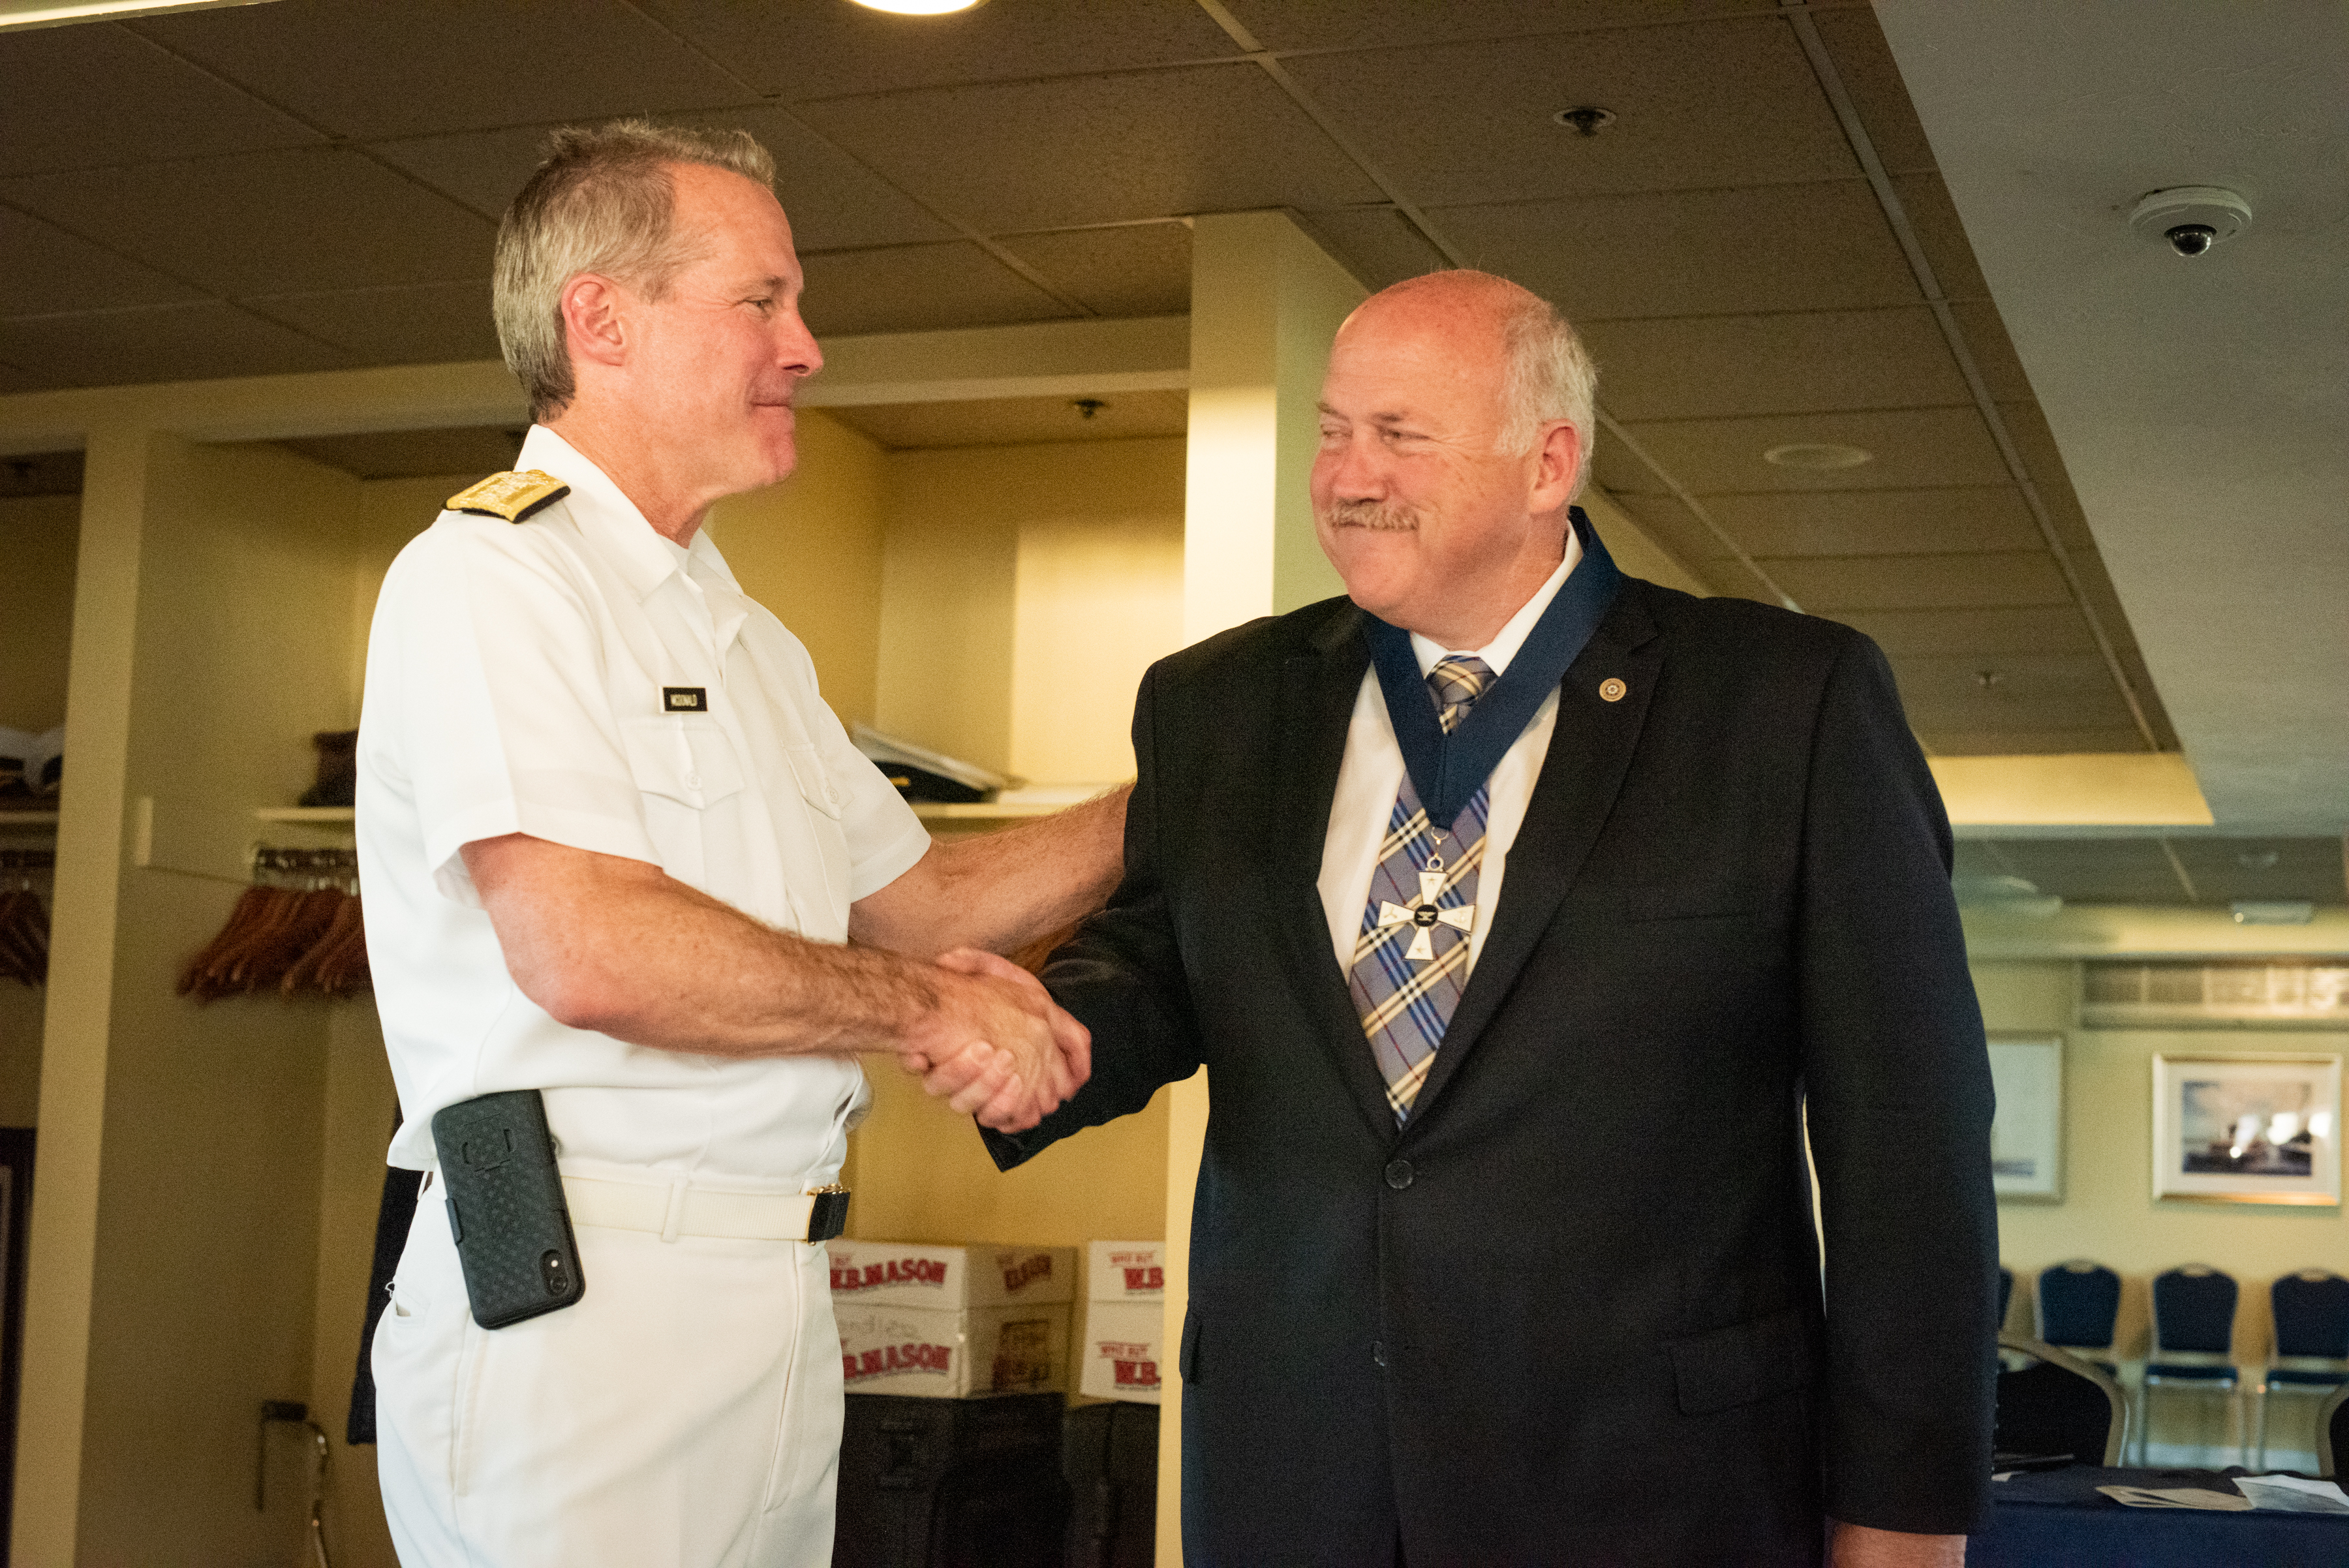 admiral shaking hands with donor